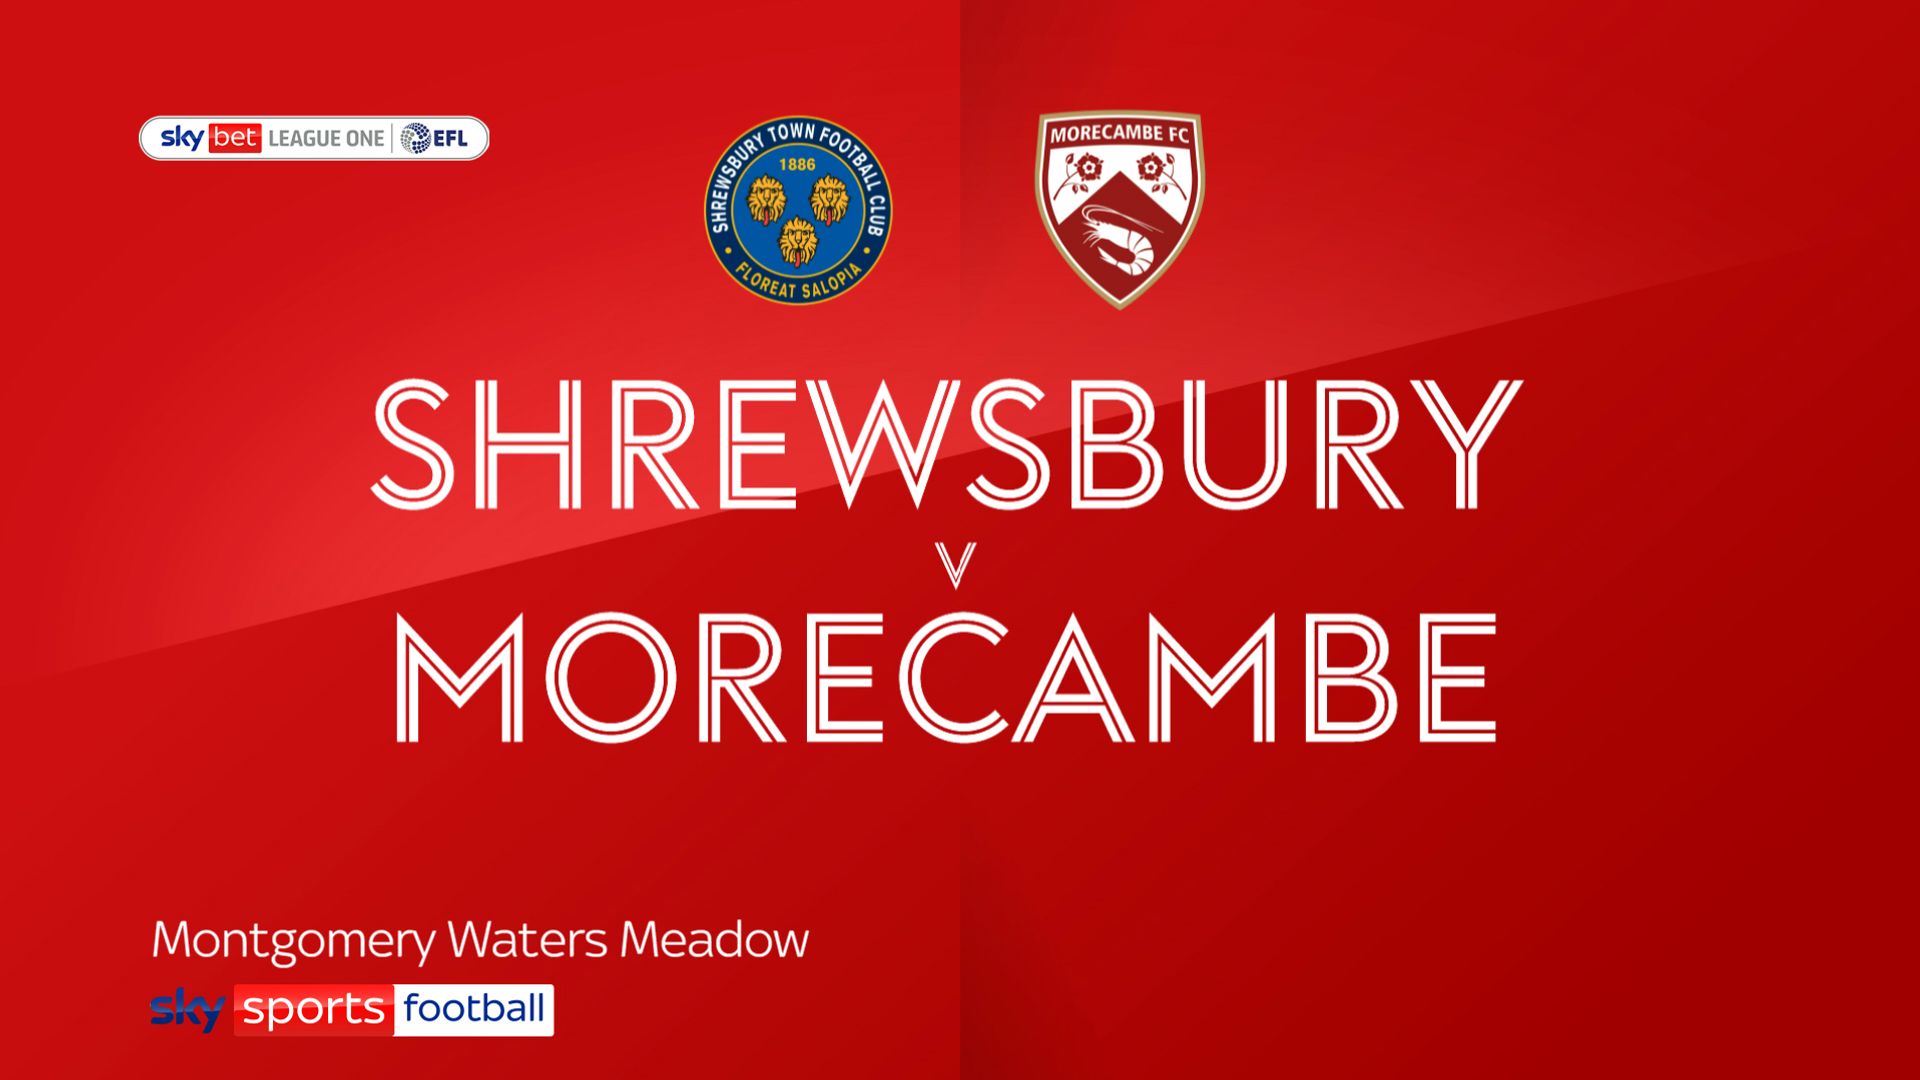 Shrewsbury 5-0 Morecambe: Luke Leahy, Daniel Udoh both score twice in Town rout